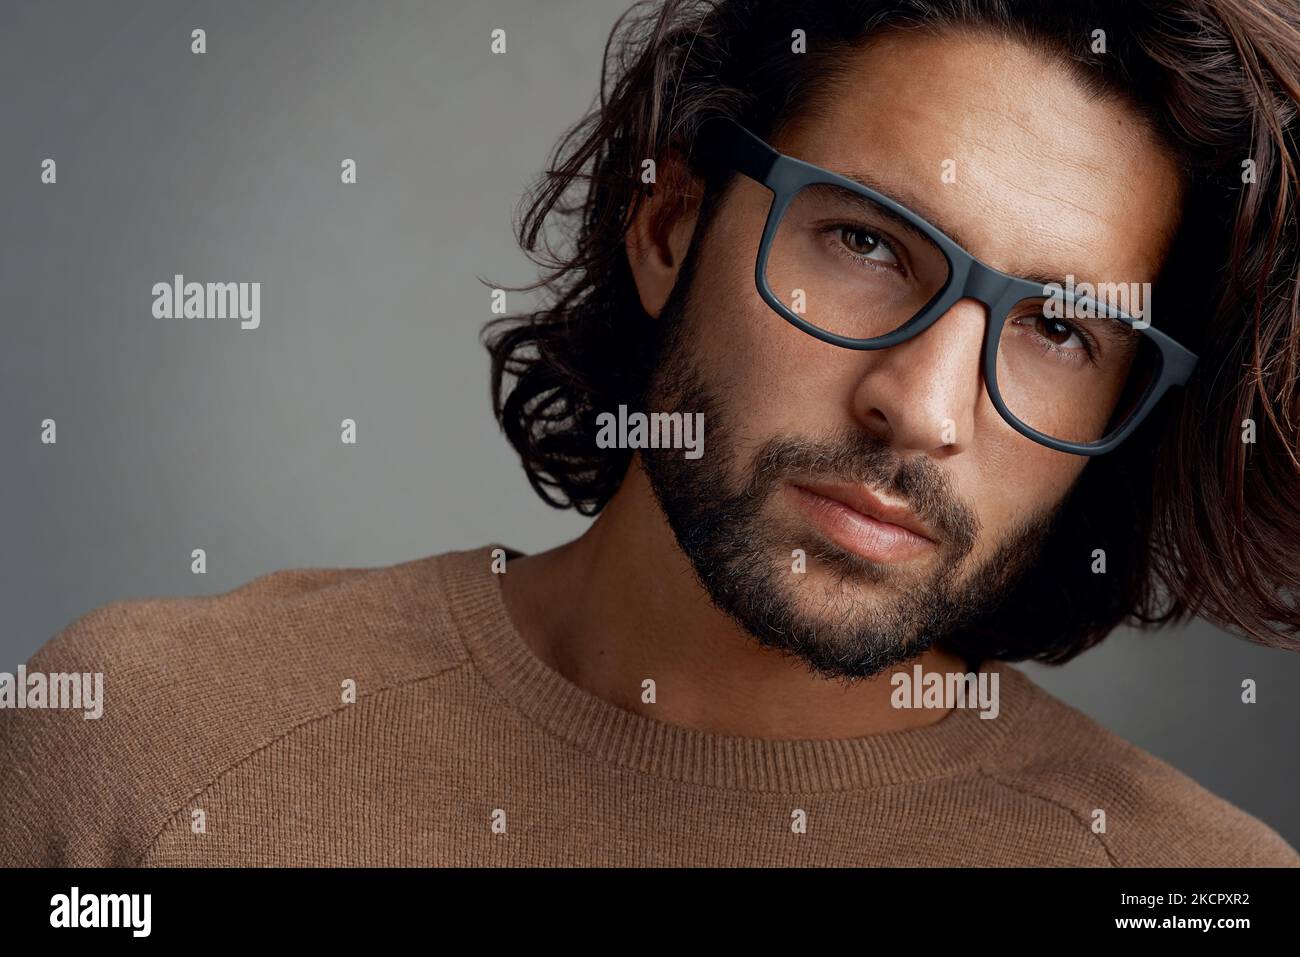 Eye catching frames that suit his face. Studio shot of a handsome young man wearing glasses against a gray background. Stock Photo